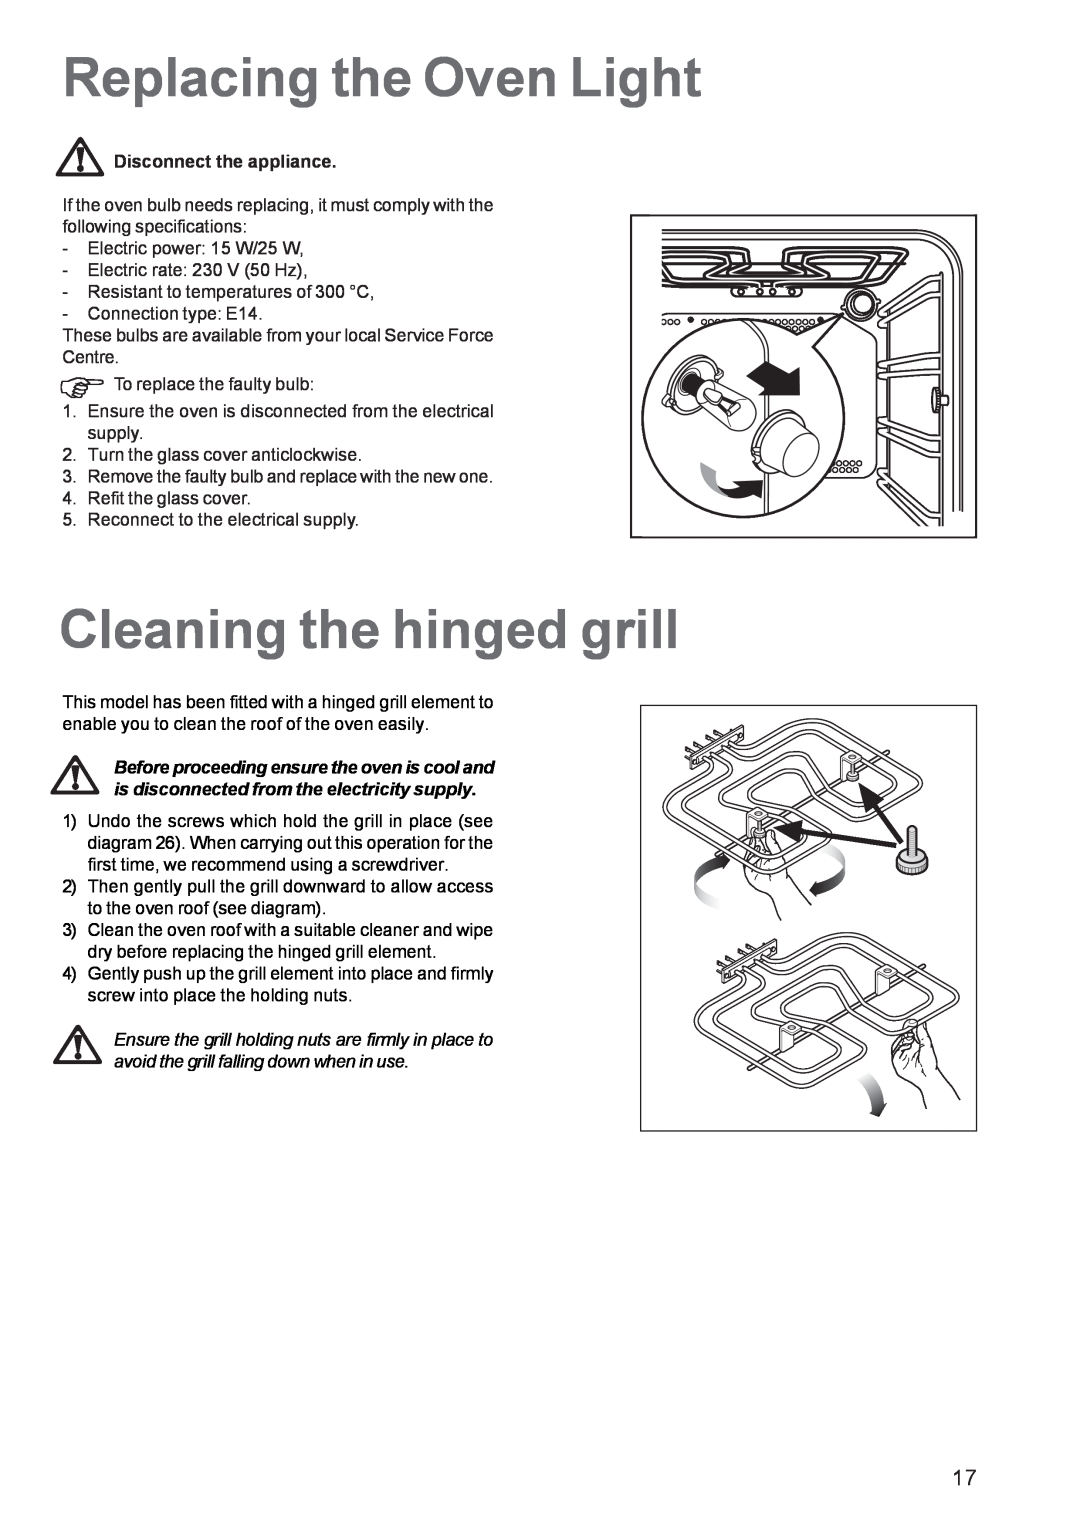 Zanussi ZBS863 manual Replacing the Oven Light, Cleaning the hinged grill, Disconnect the appliance 